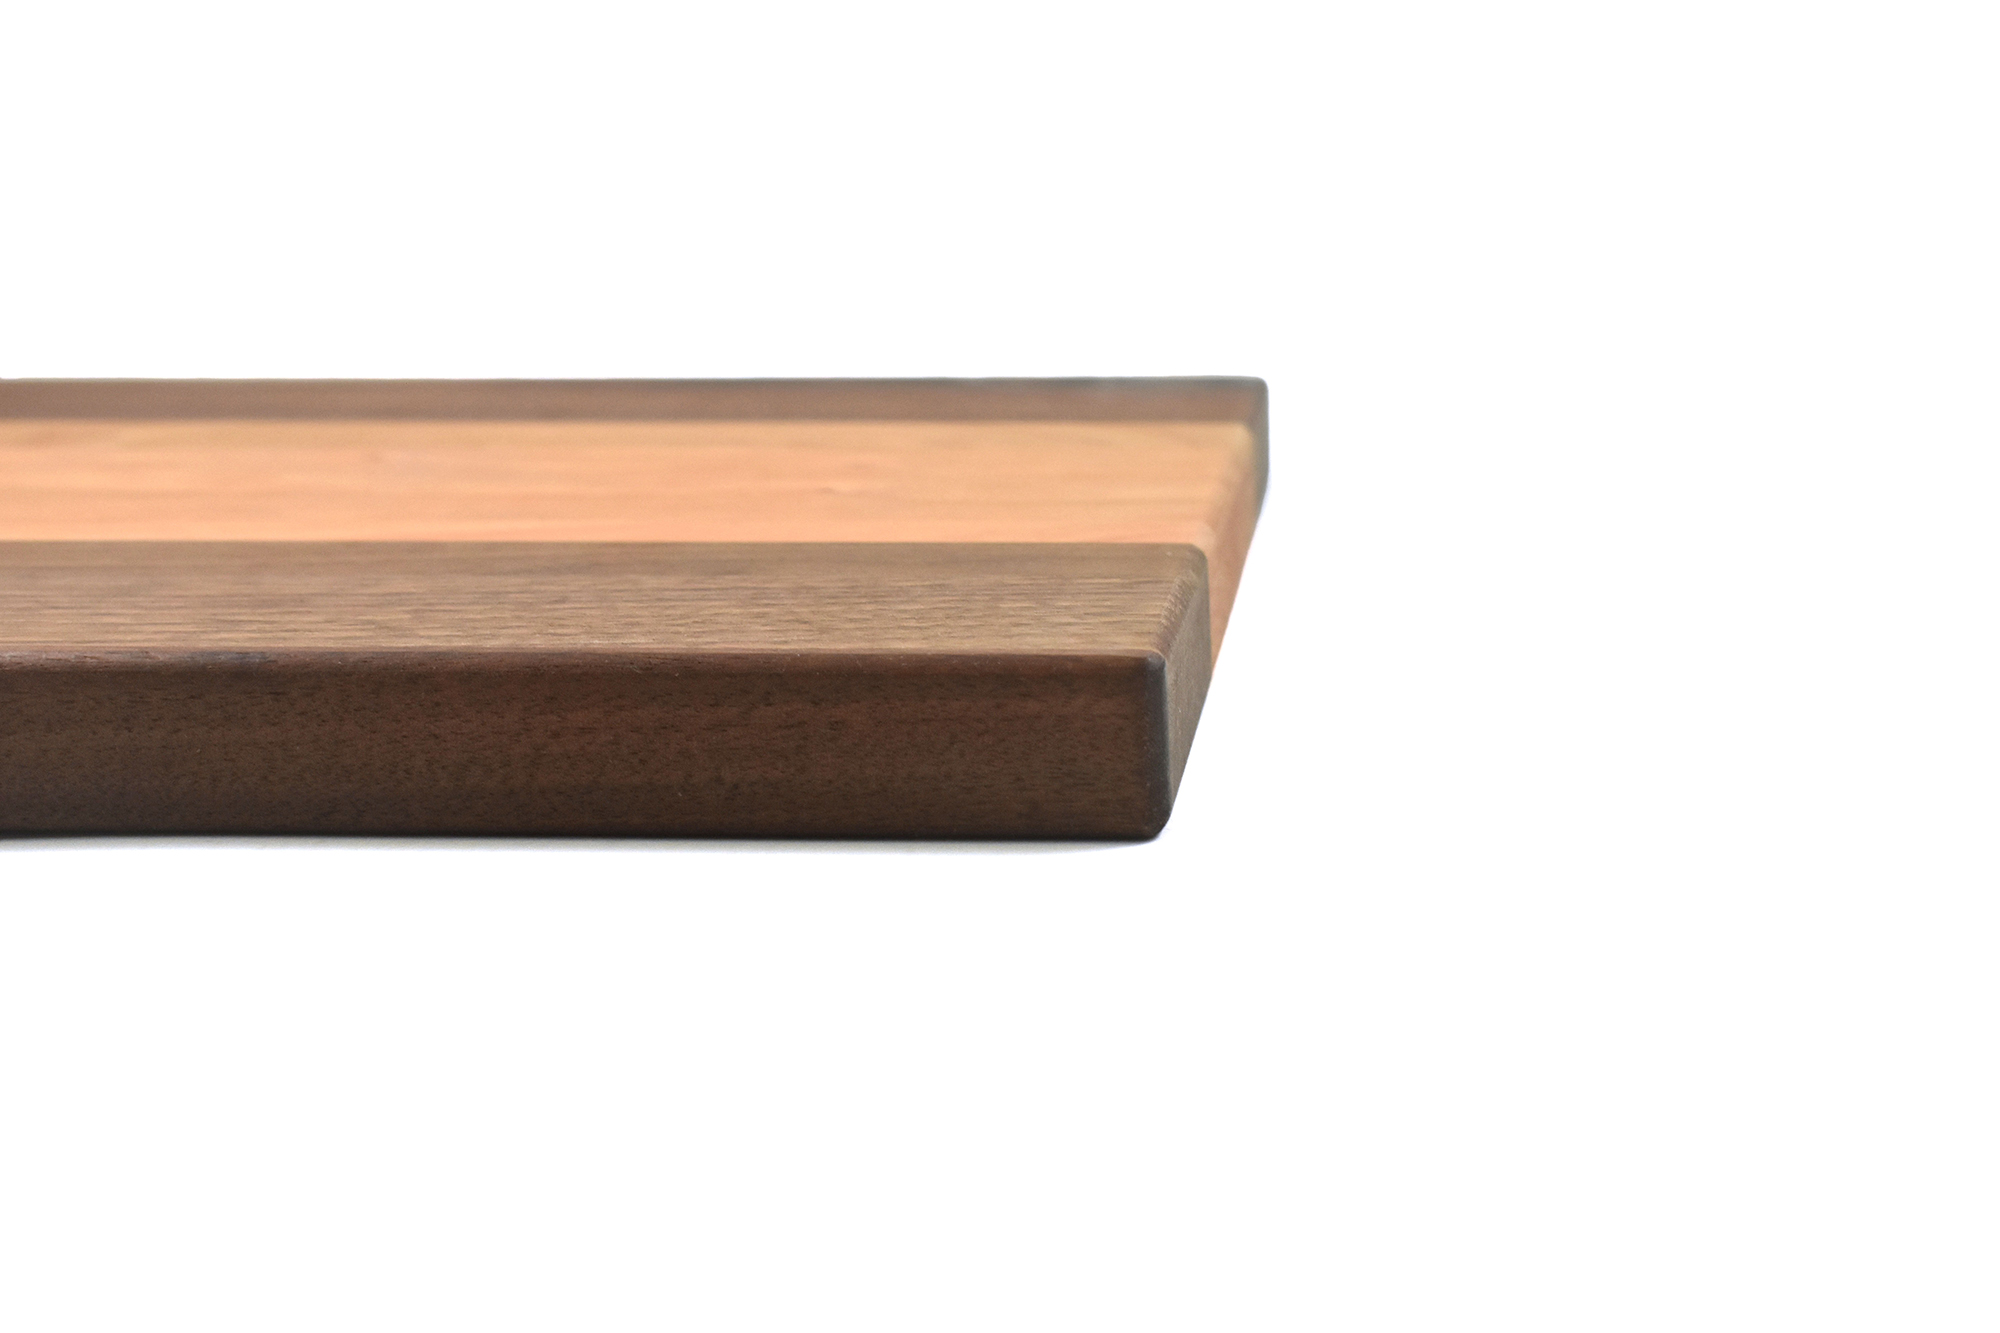 Multi wood species cutting board - Walnut wood ends with Cherry wood in the middle